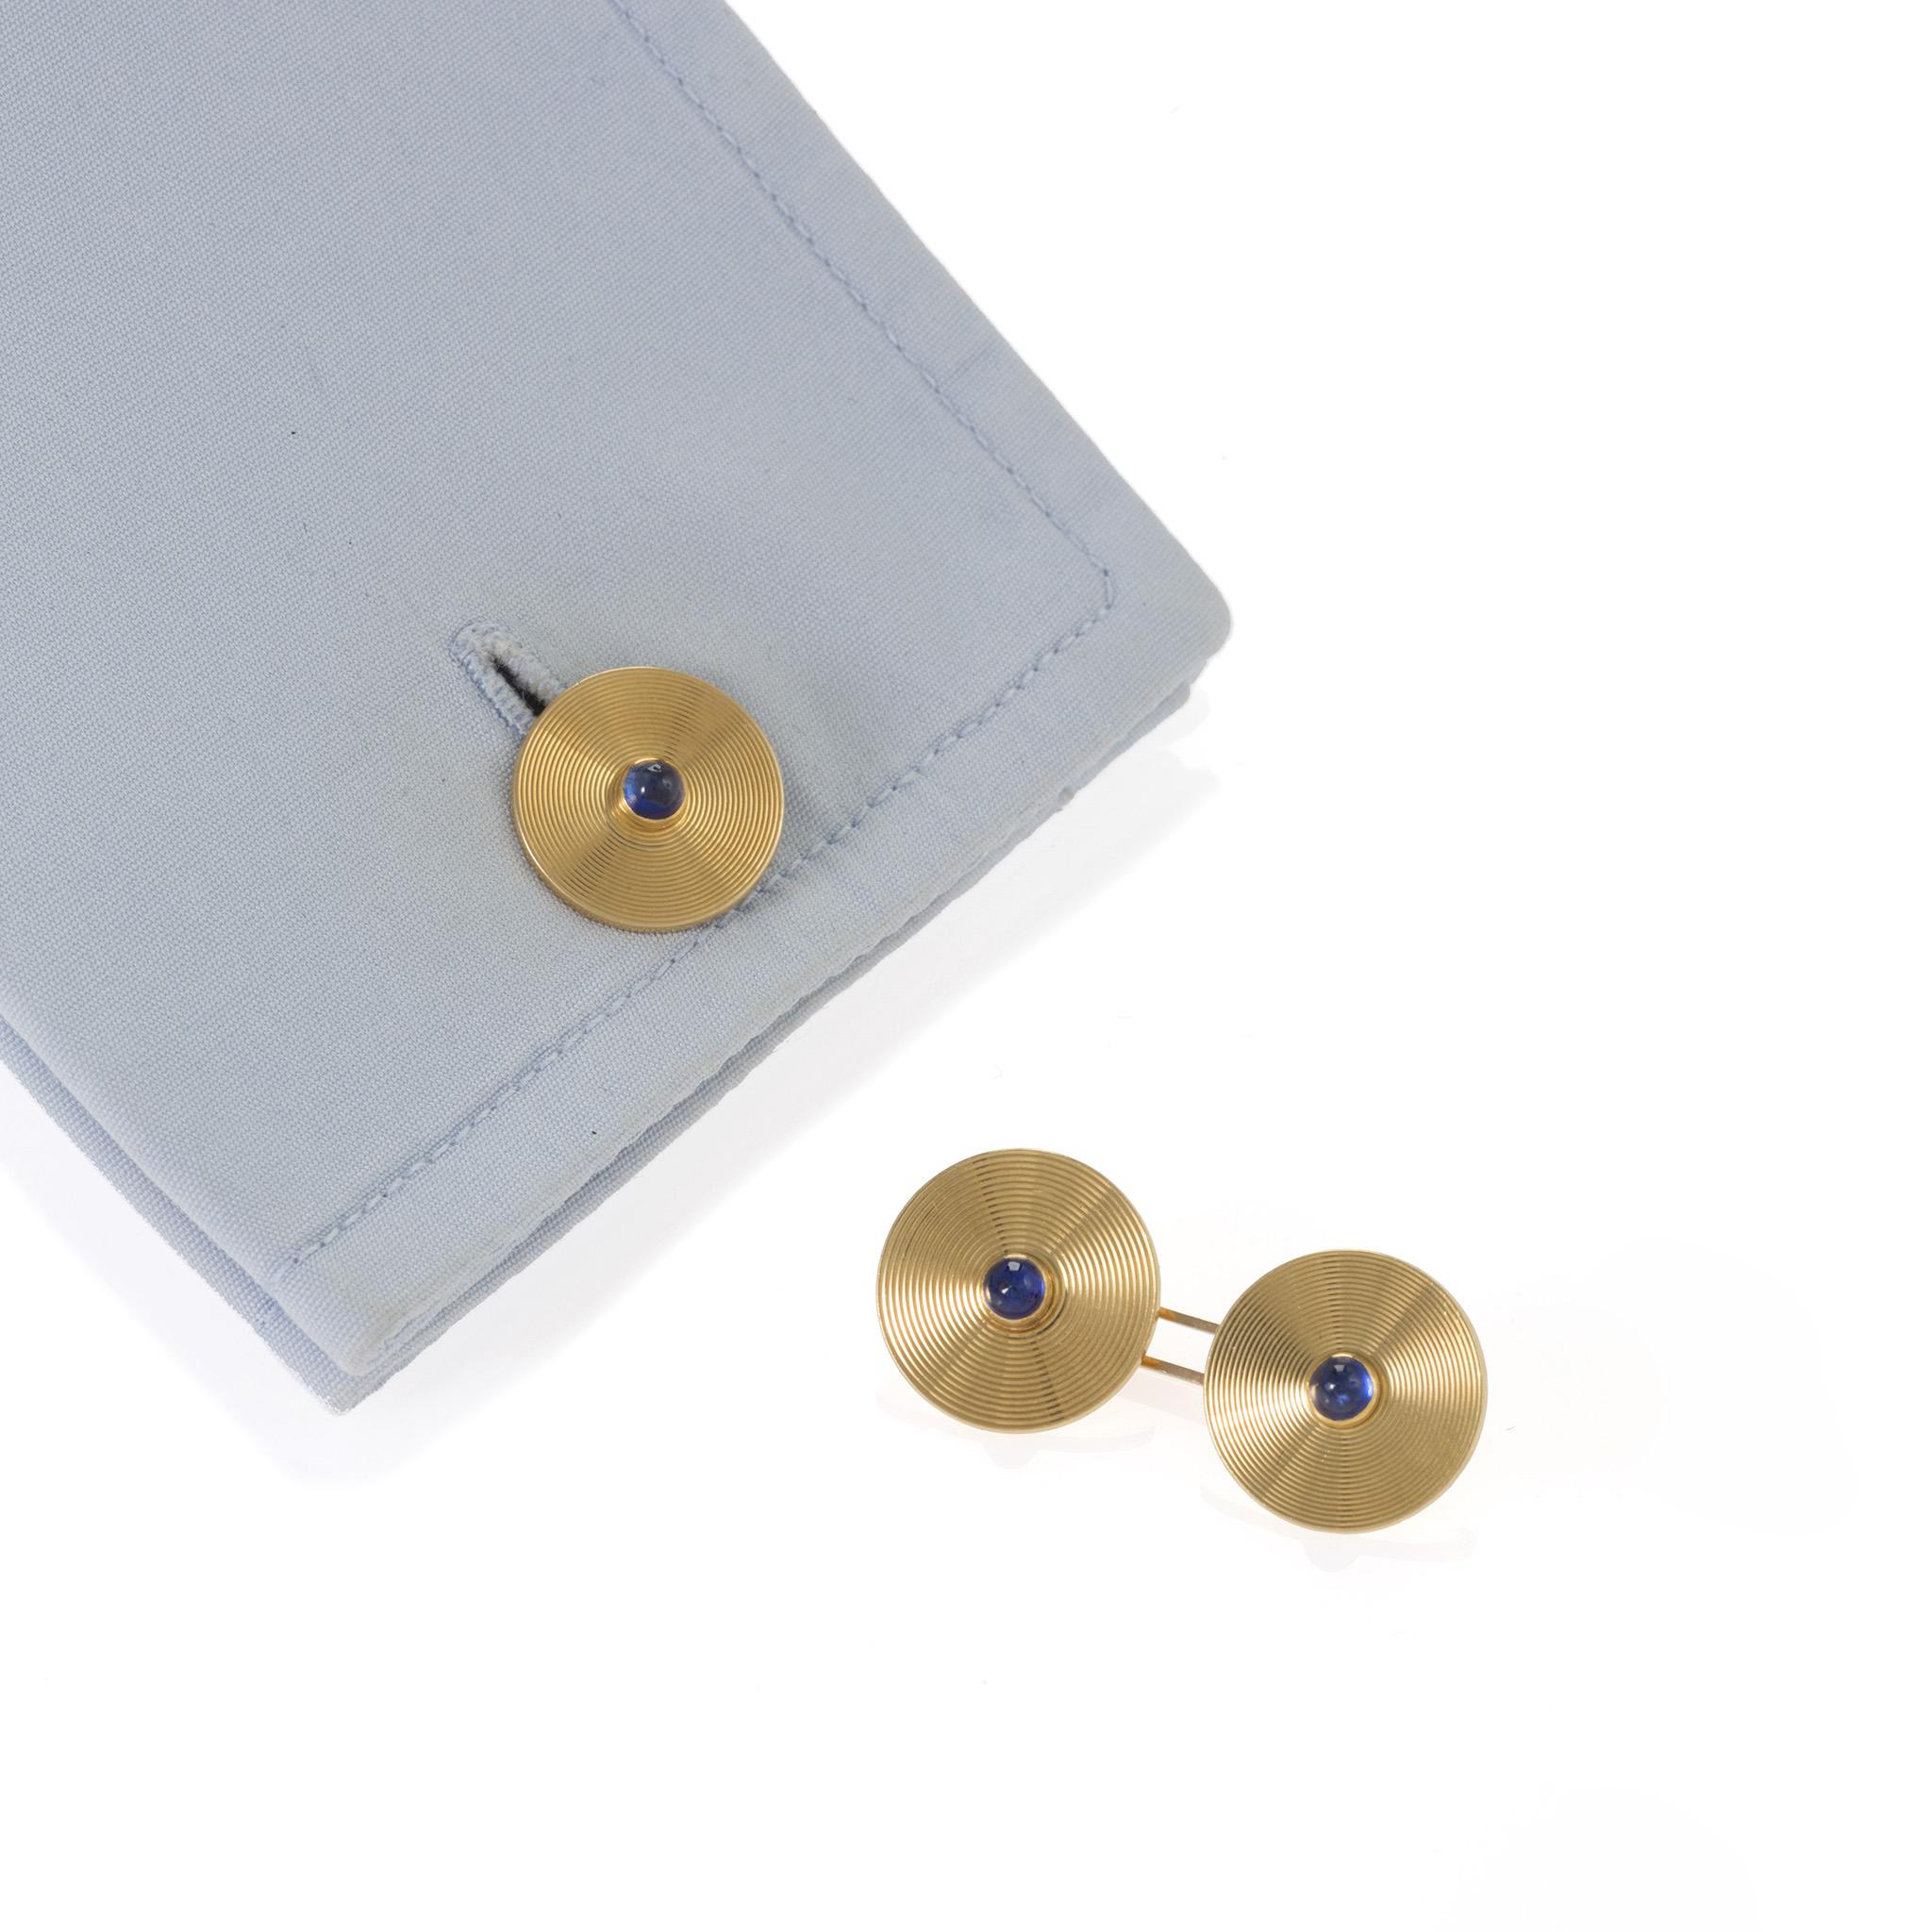 Dating from the Art Deco period, these circular gold cuff links are set with sapphire cabochons. Designed as double links, each engine-turned disk centers a bezel-set sapphire cabochon, combining the bright blue of the sapphires with rich yellow